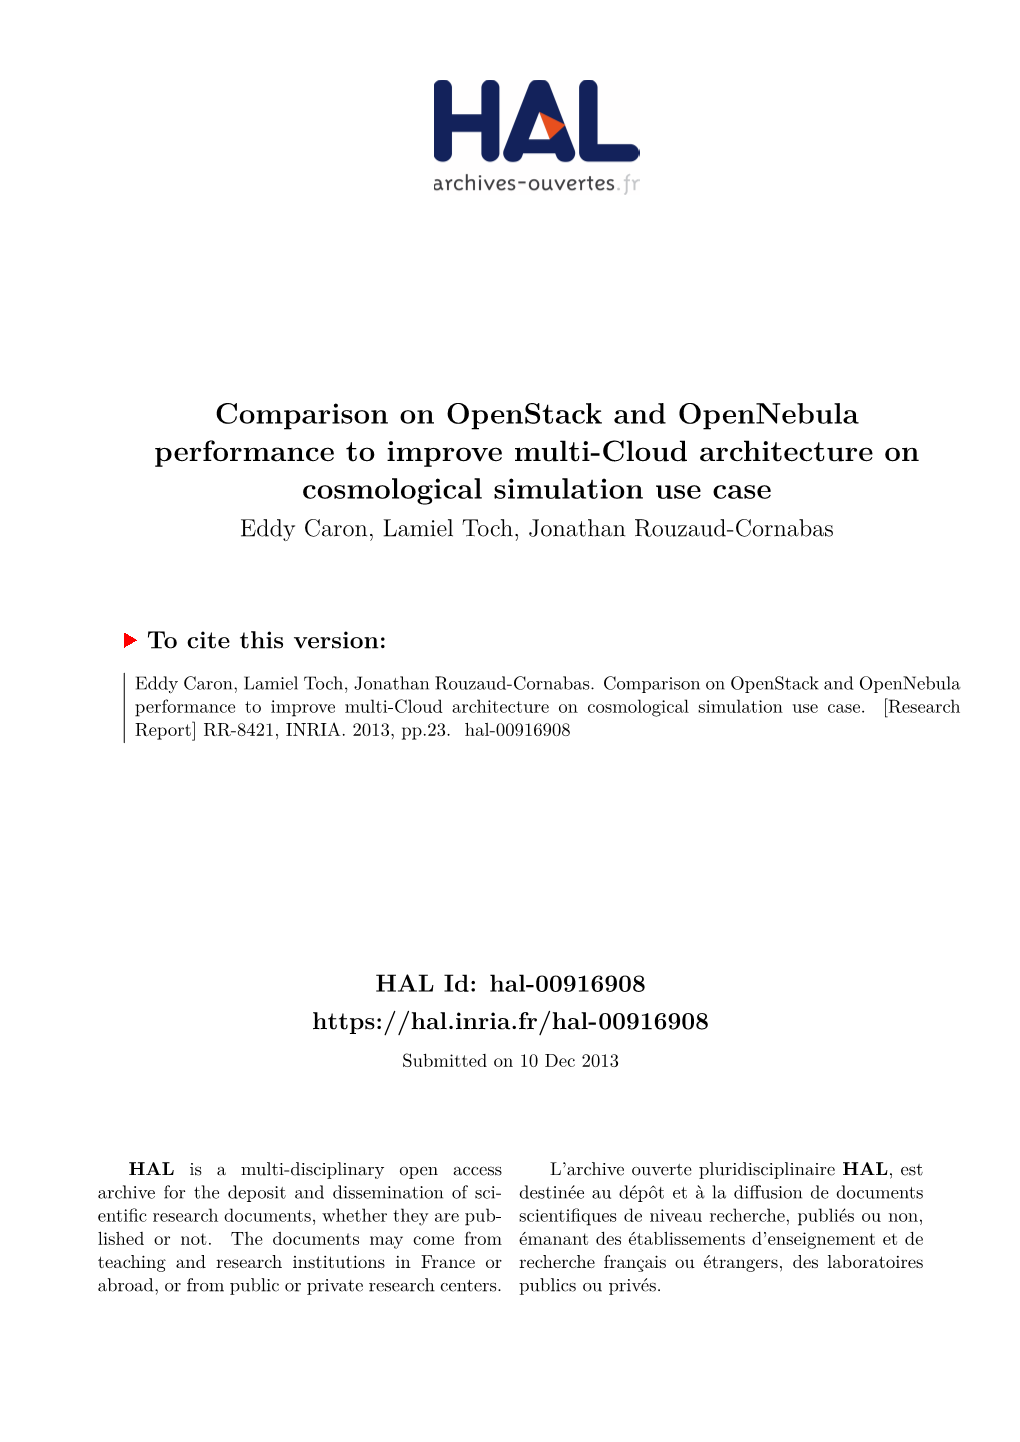 Comparison on Openstack and Opennebula